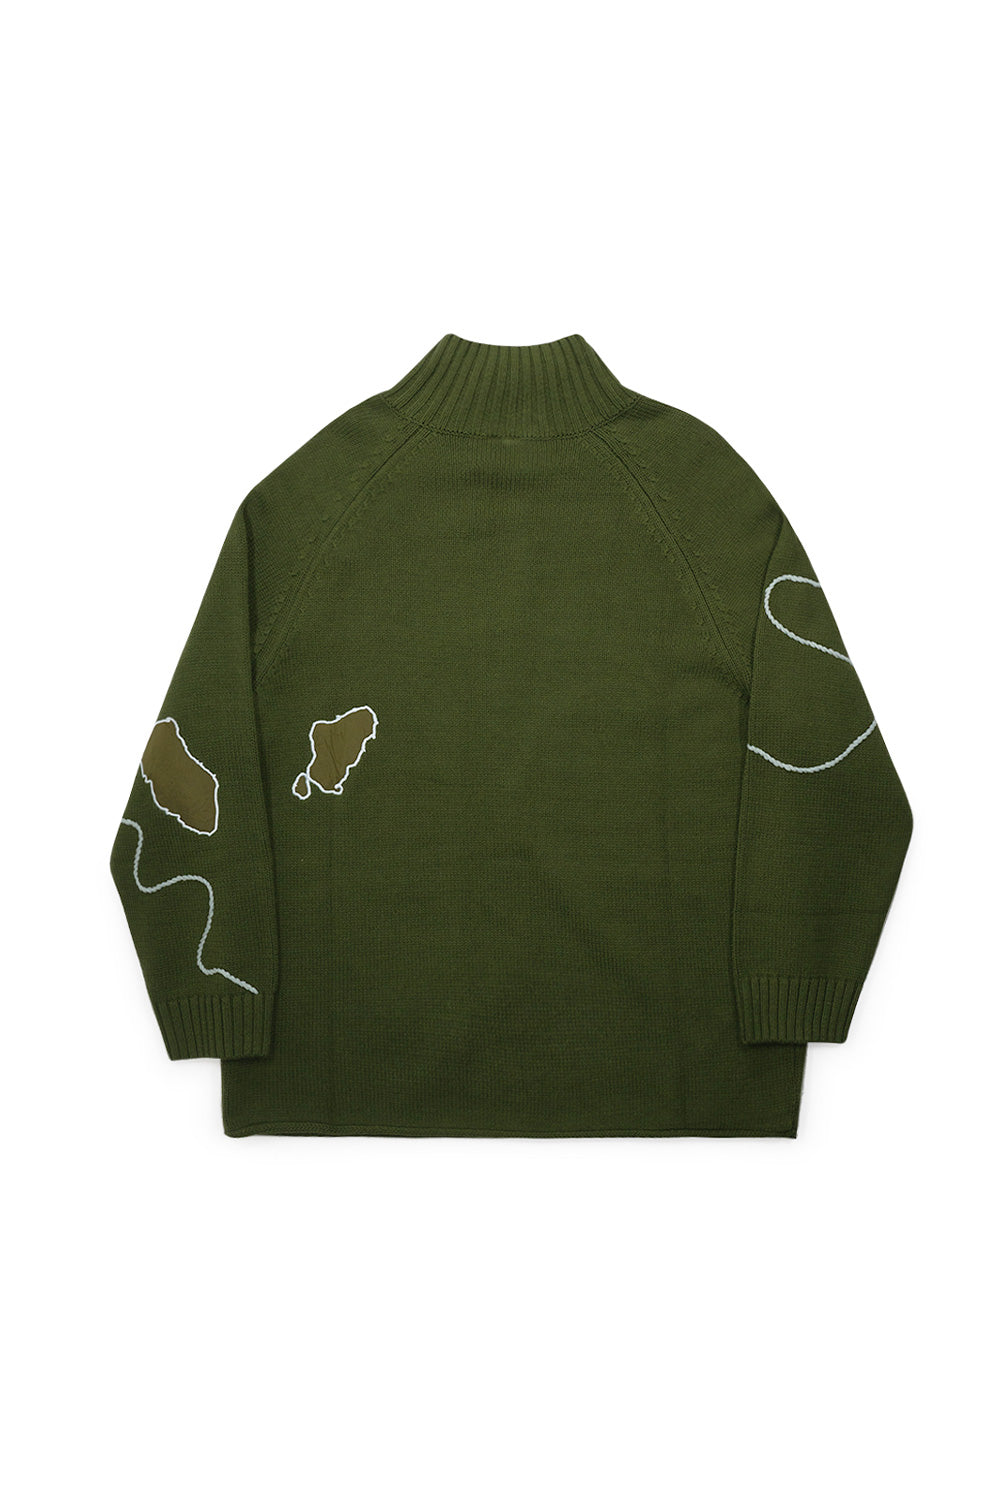 Perks And Mini Relief High Neck Knit Olive Leaf - BONKERS